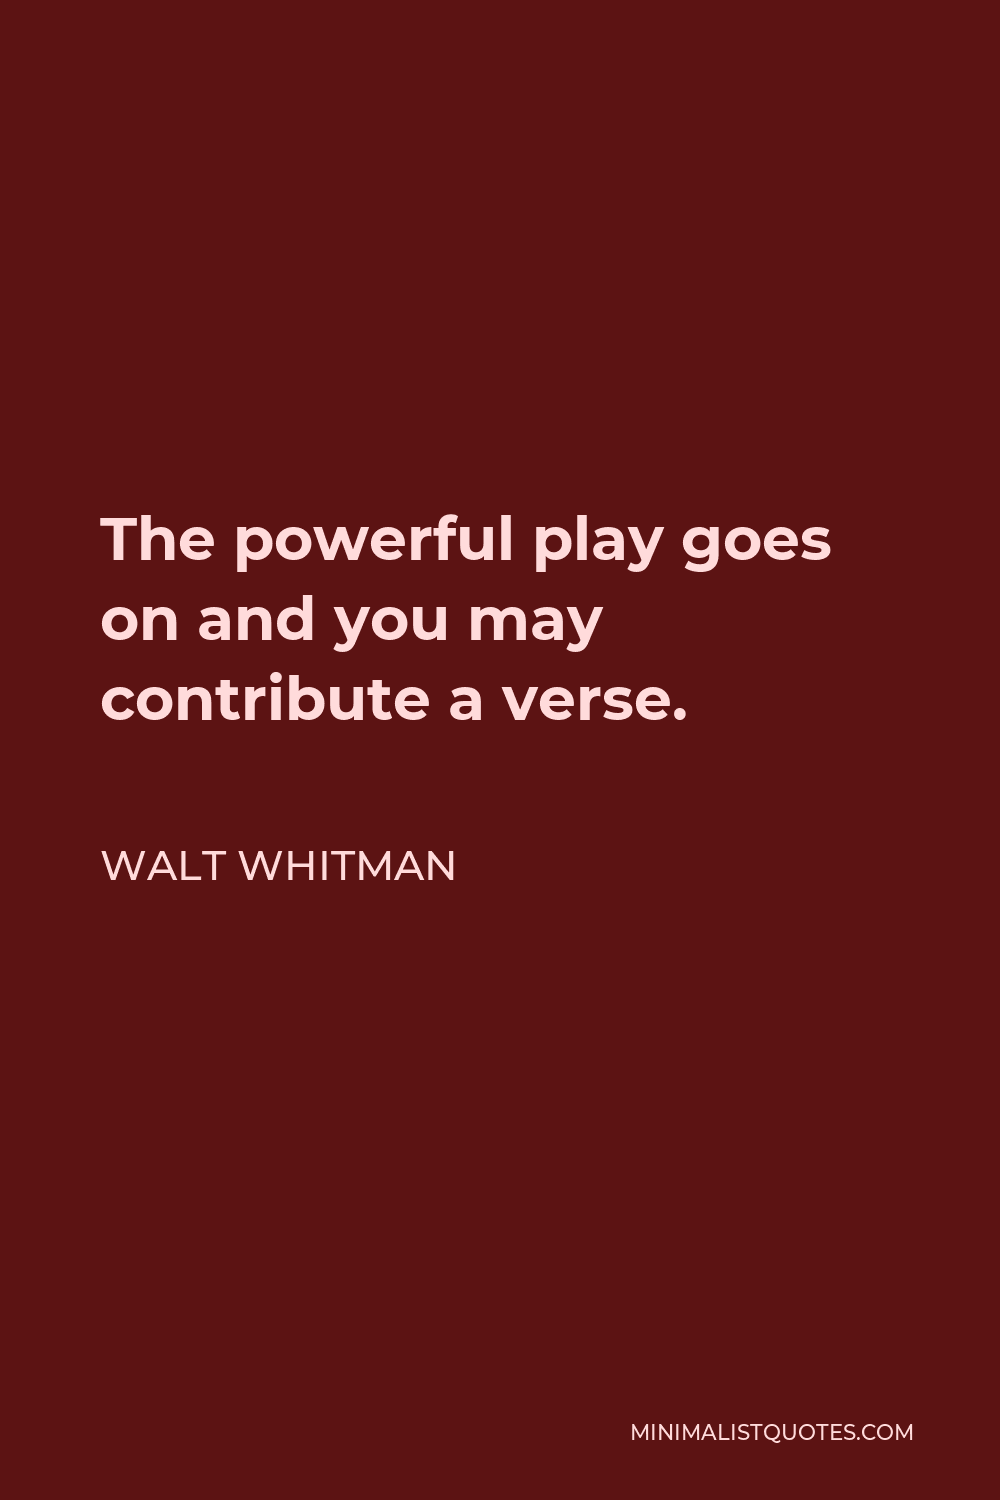 Walt Whitman Quote - The powerful play goes on and you may contribute a verse.